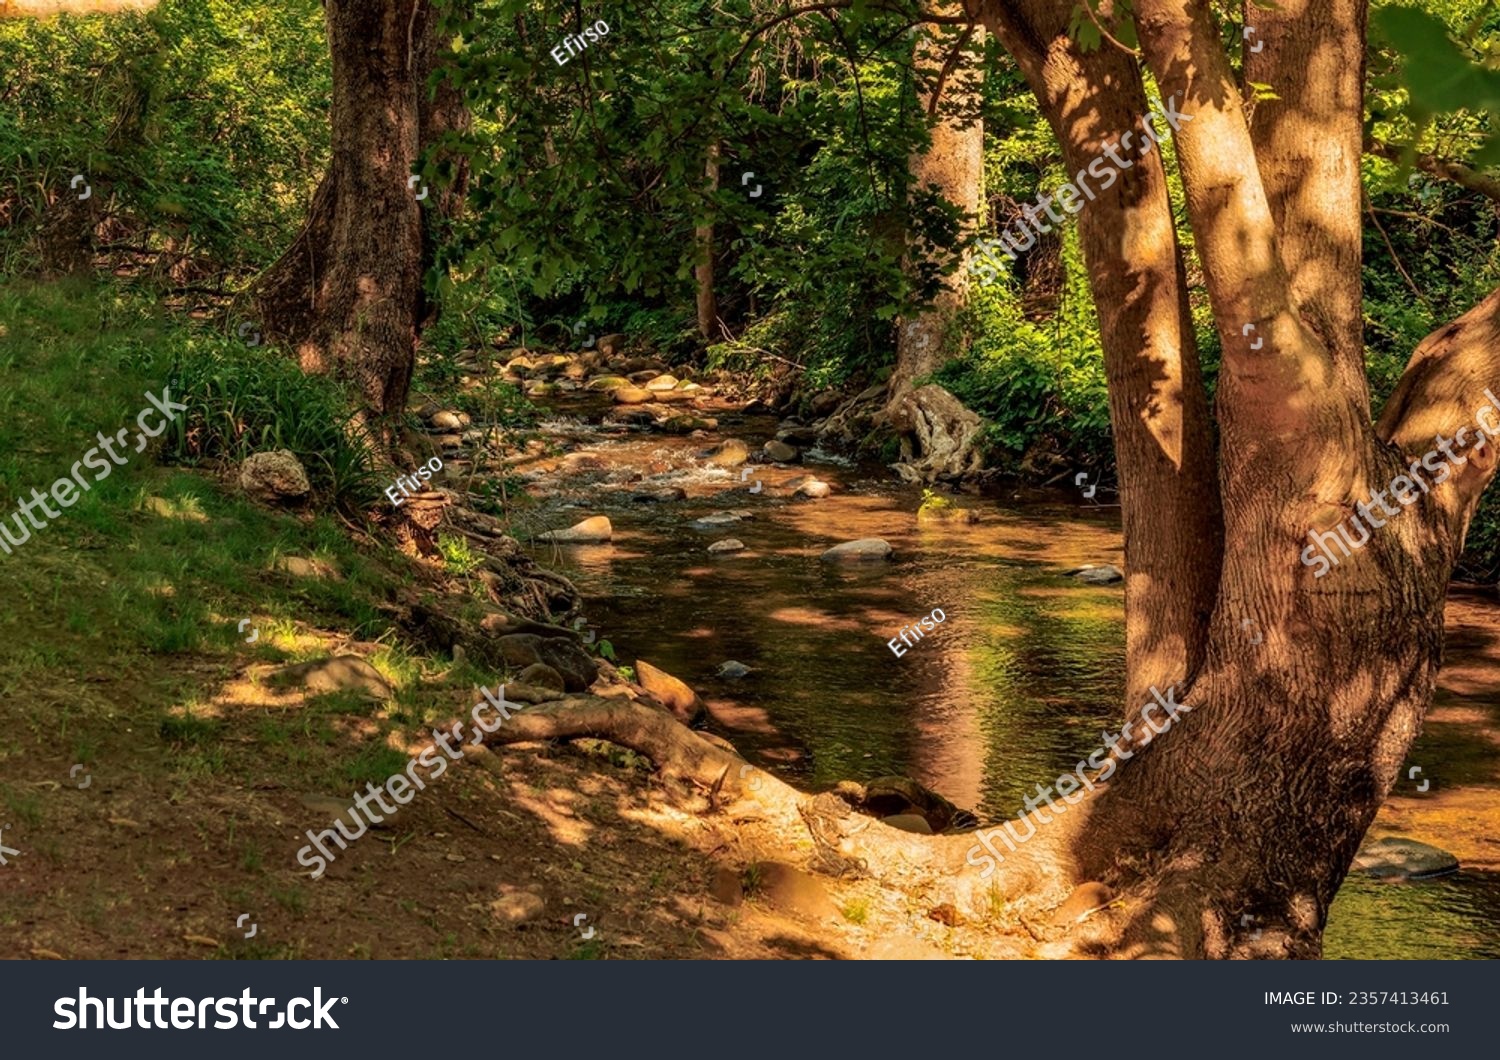 On the bank of a forest stream in the shade. Cold creek in forest. Forest river stream. Forest stream in shadows #2357413461